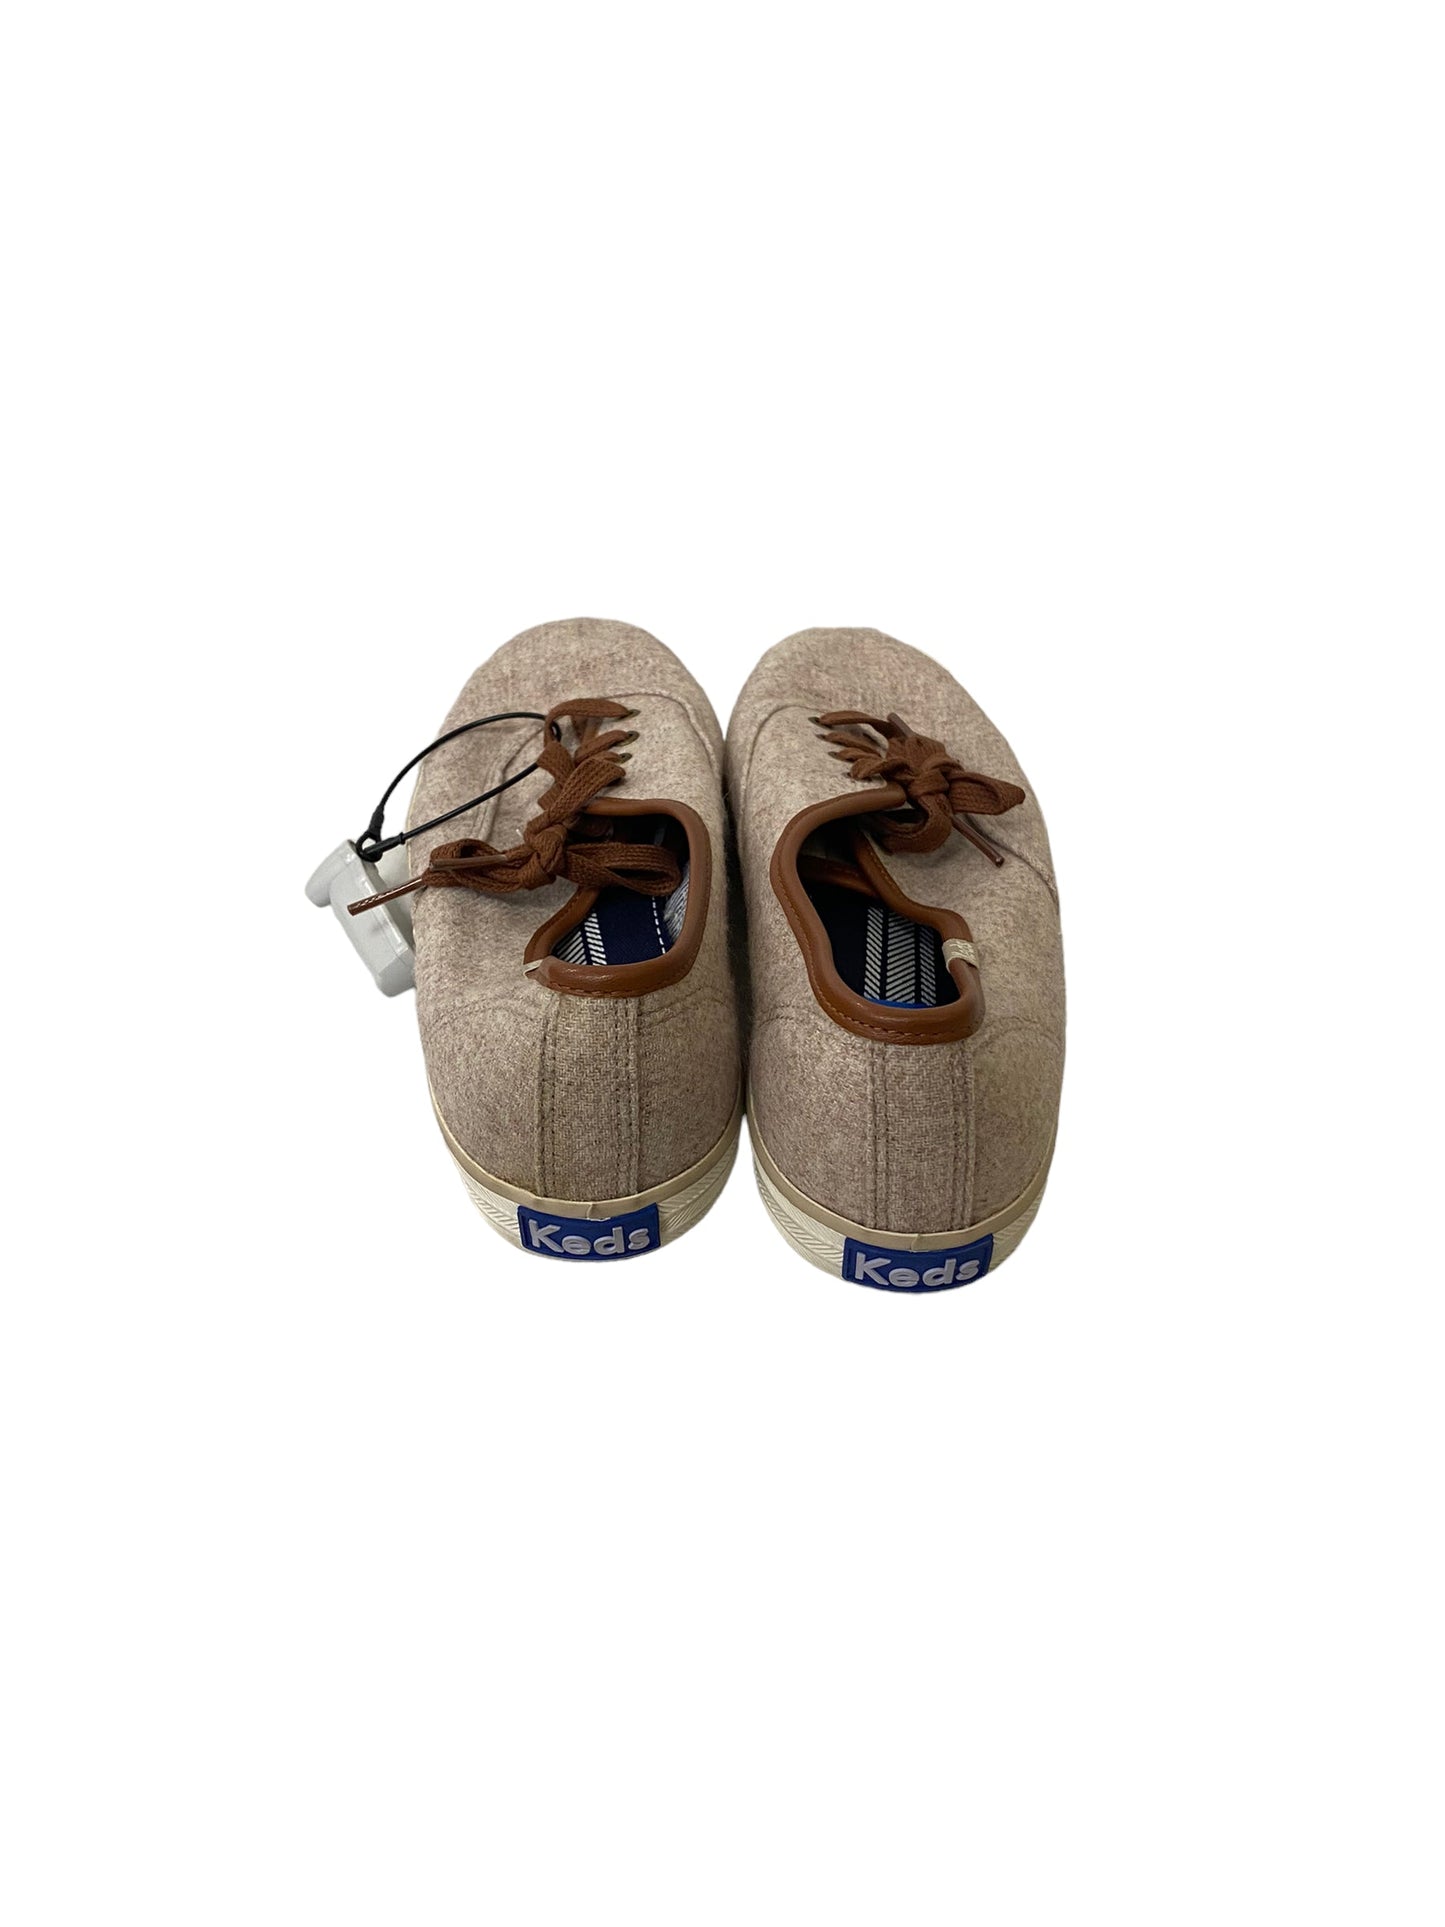 Shoes Flats Boat By Keds  Size: 9